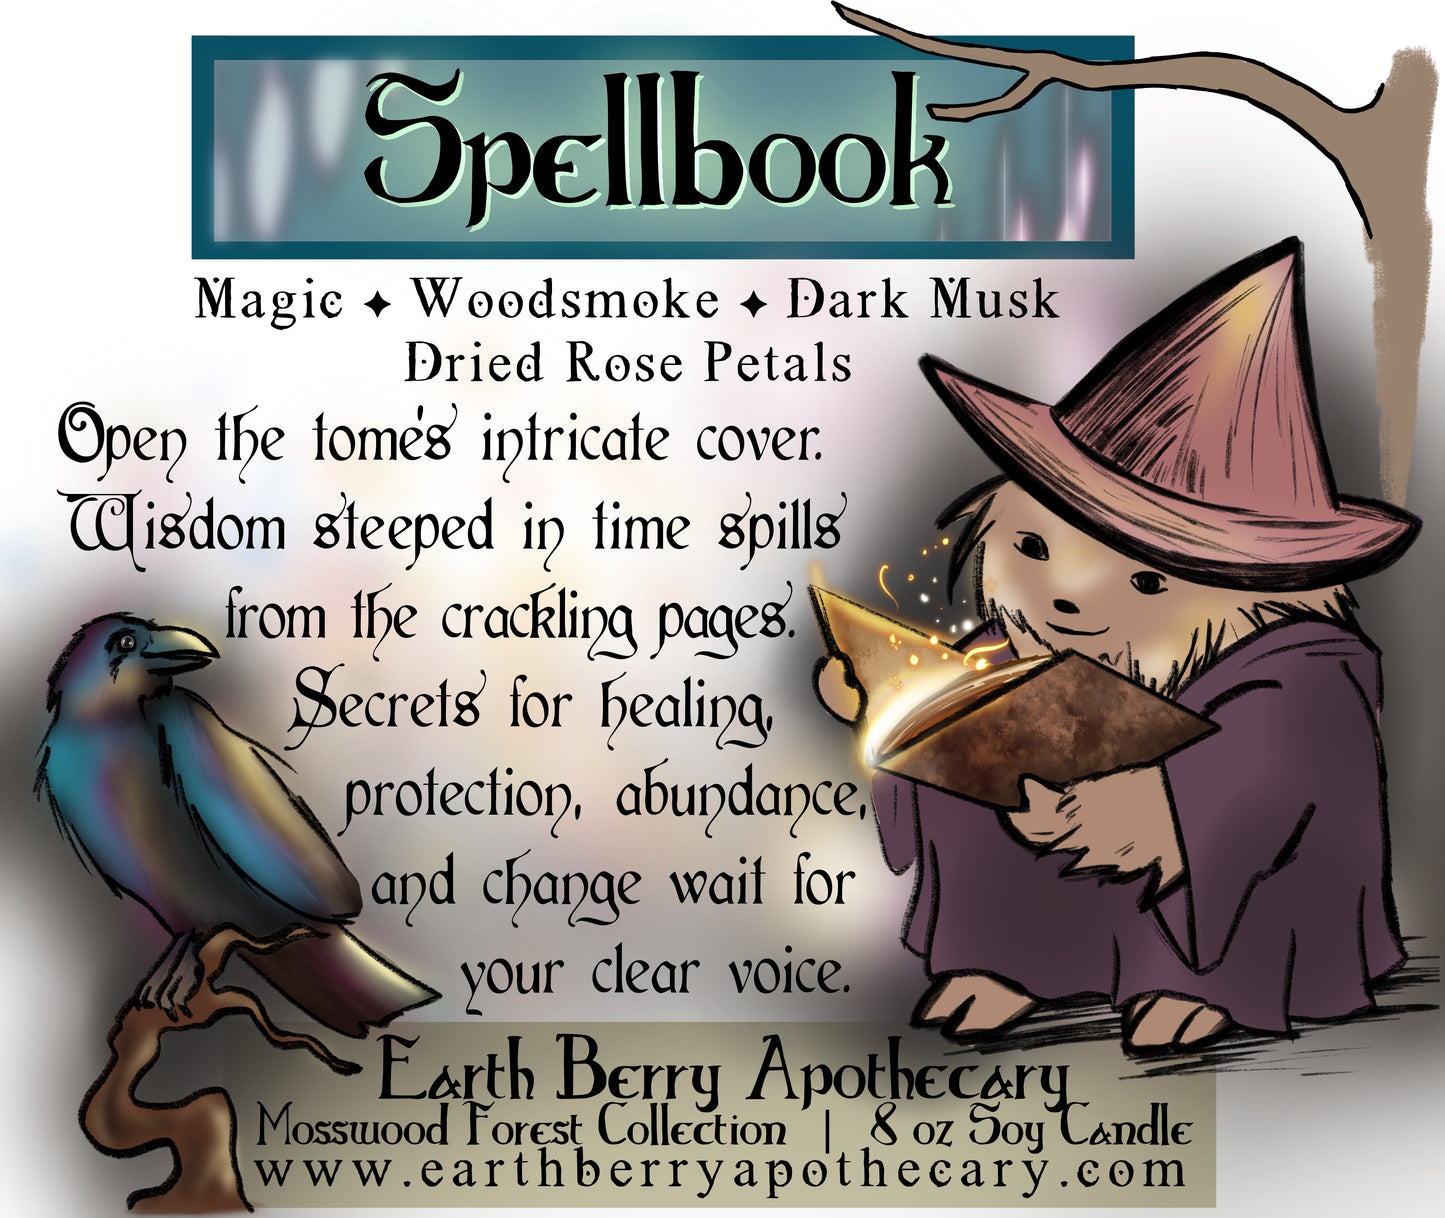 Spellbook Soy Candle